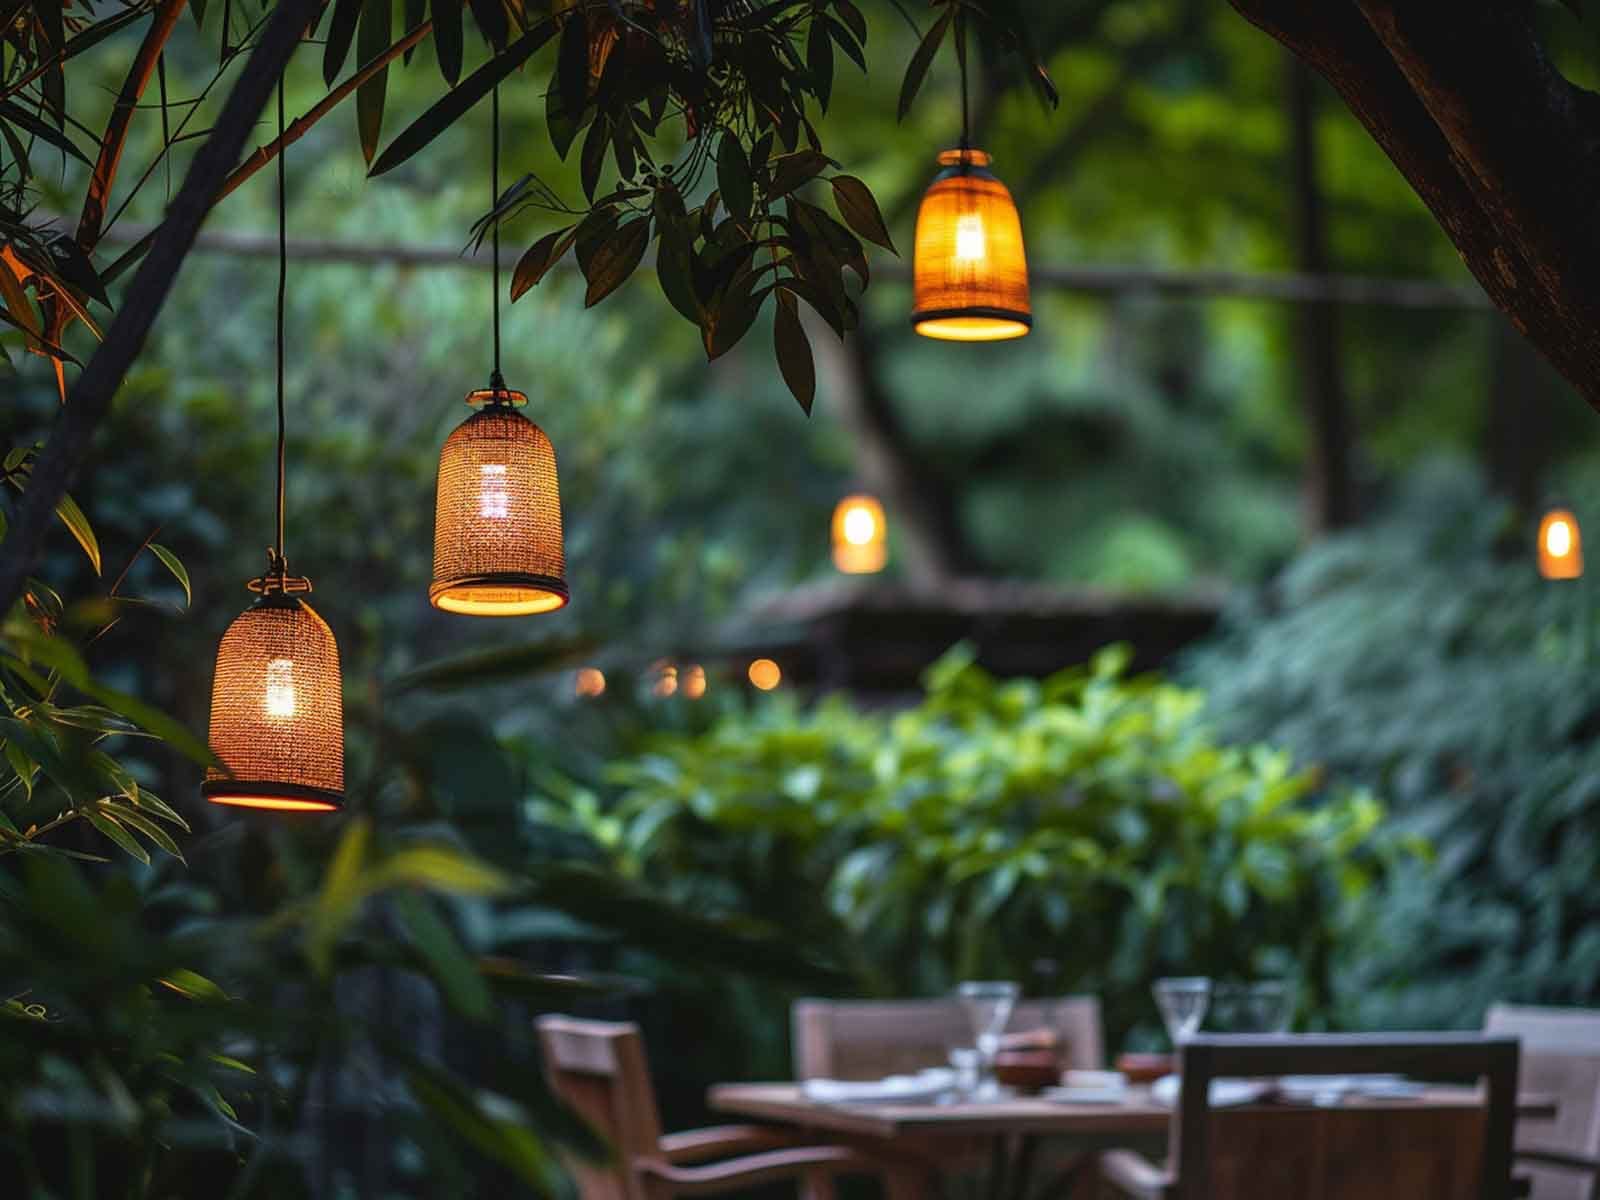 Pendant lights suspended from a garden tree